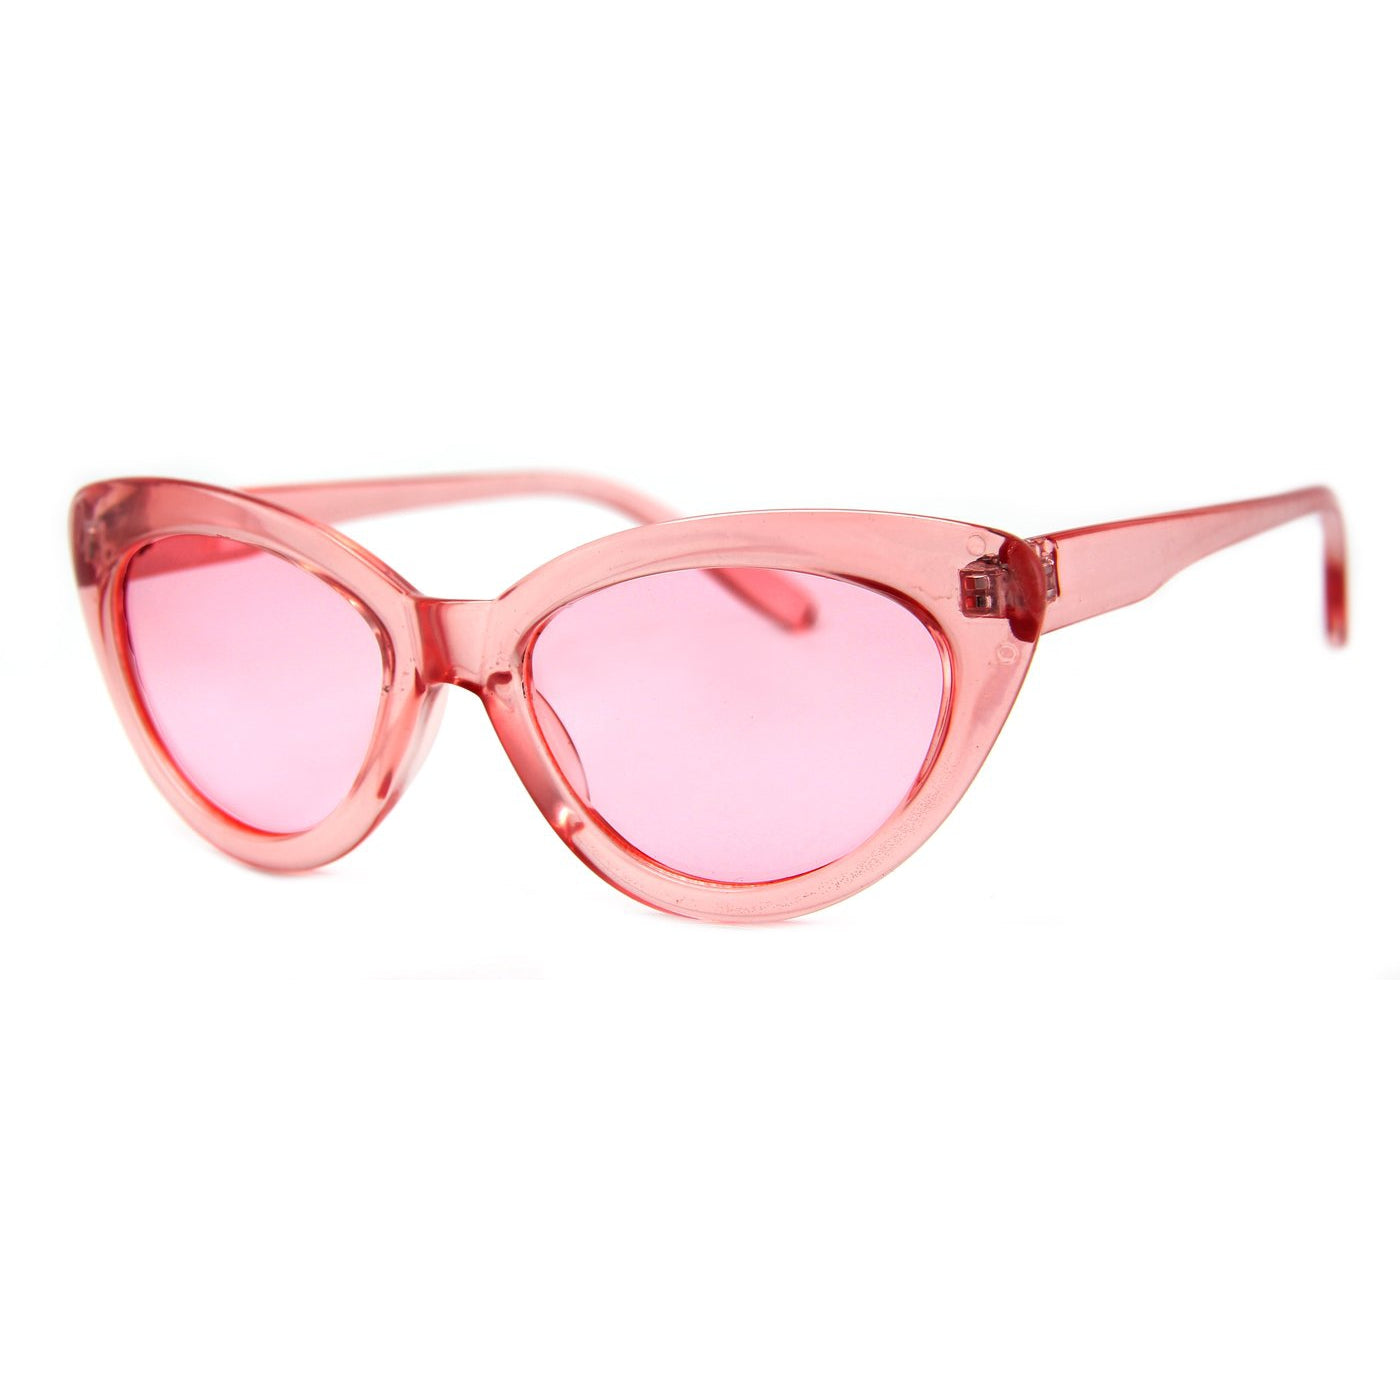 My Melody Sunglasses - Cry Pink